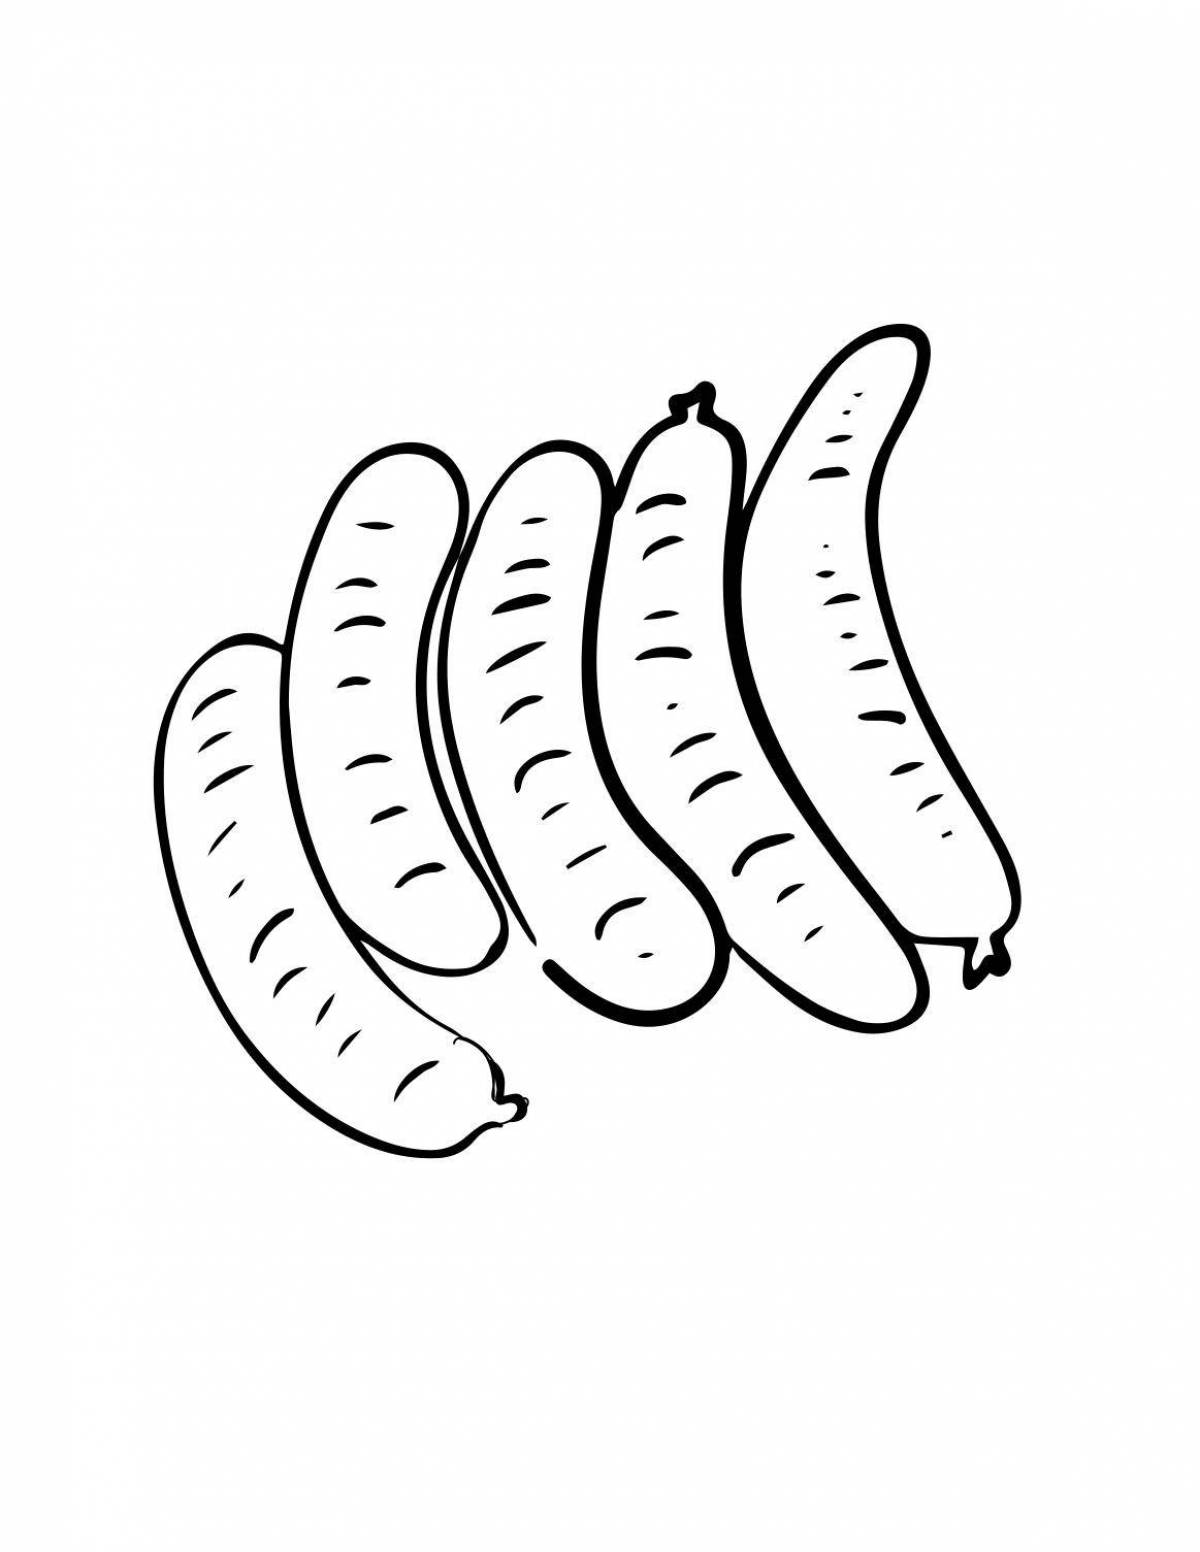 Coloring page nice sausages